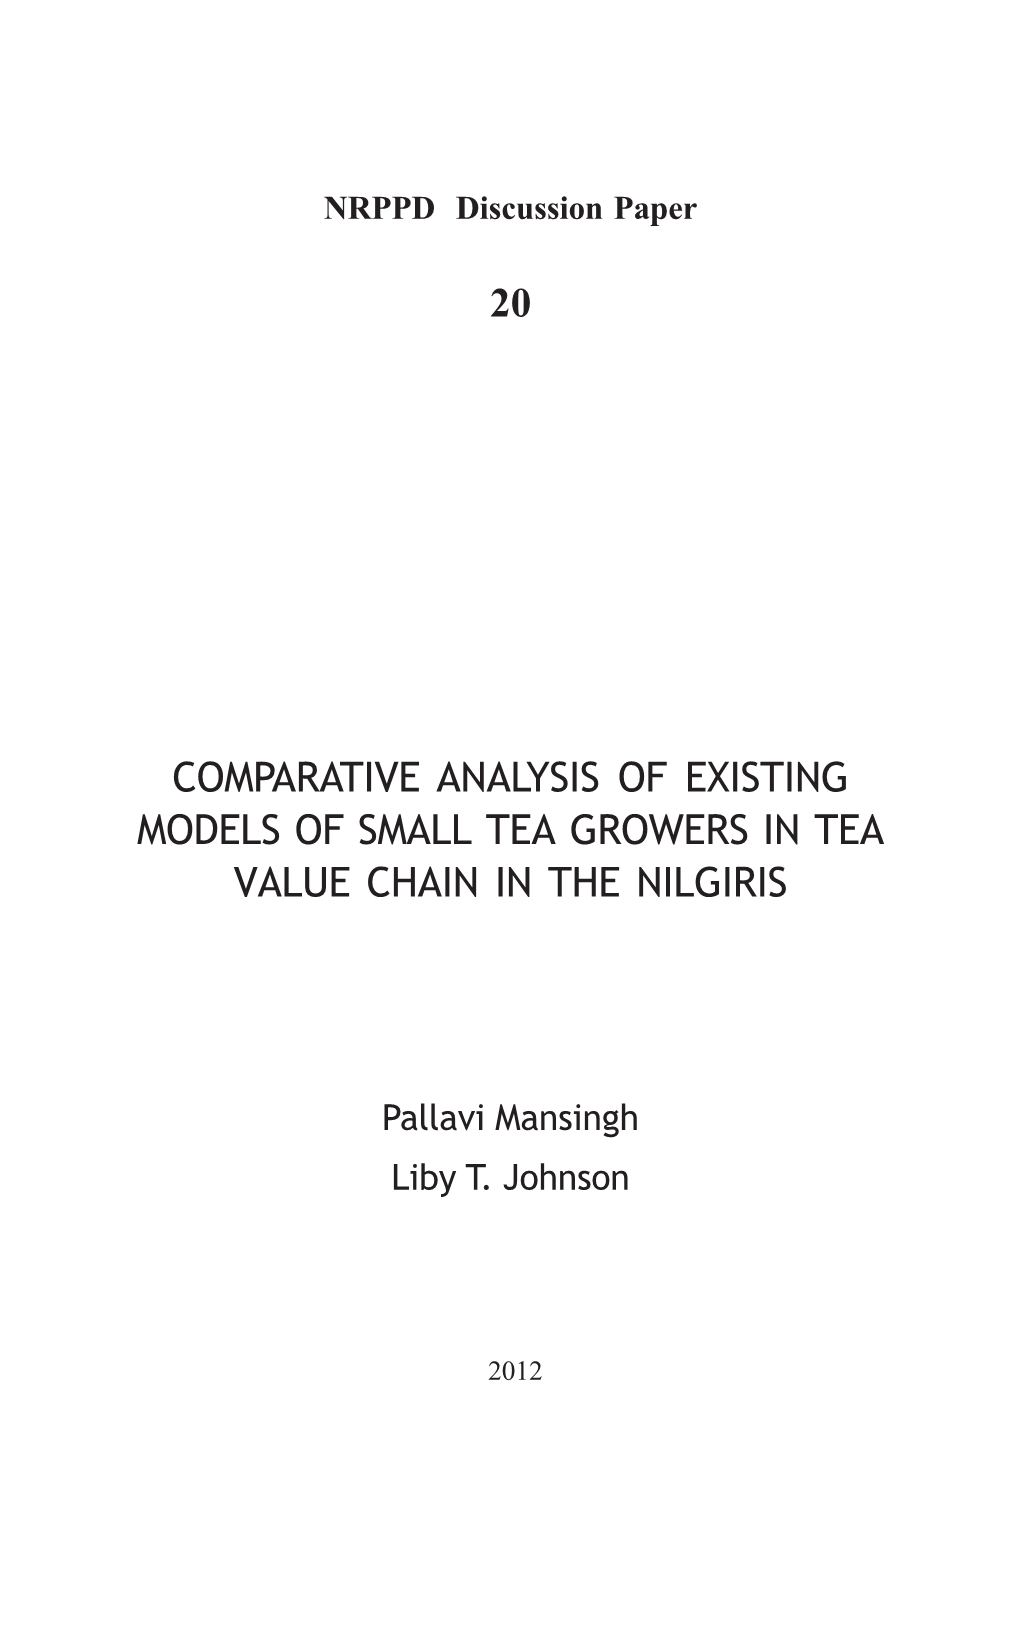 Comparative Analysis of Existing Models of Small Tea Growers in Tea Value Chain in the Nilgiris